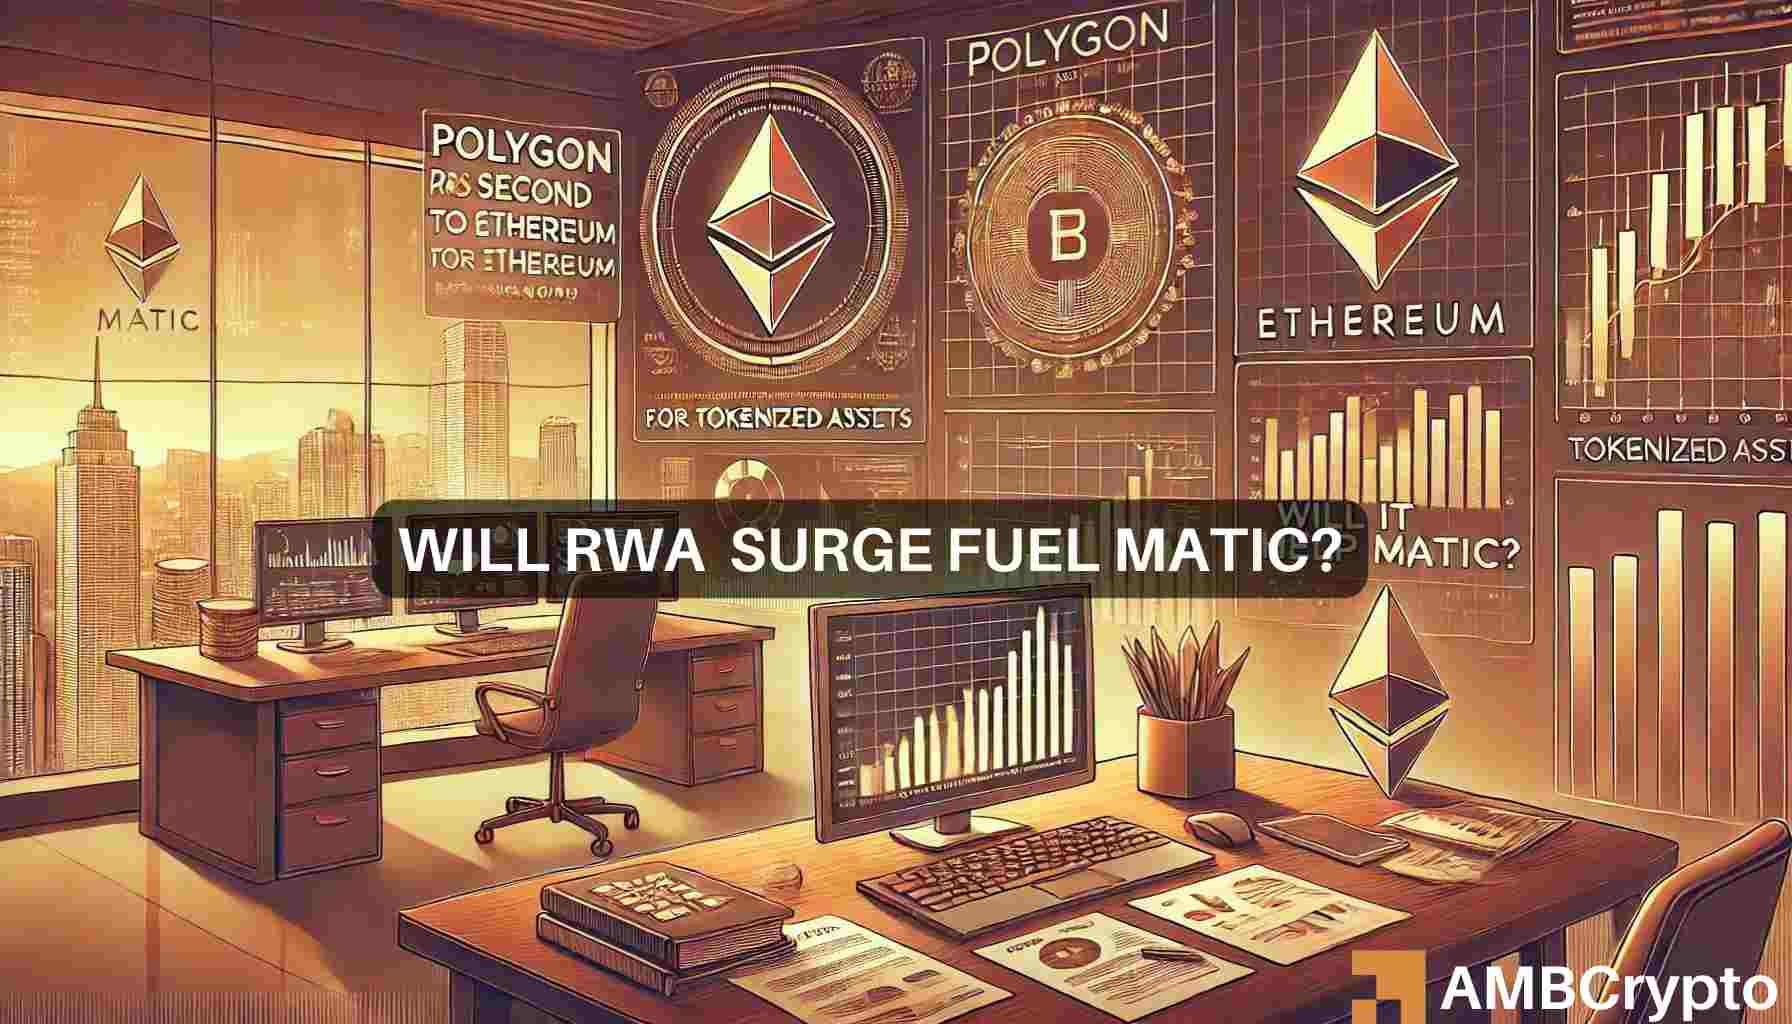 Polygon ranks second to Ethereum for tokenized assets – Will it help MATIC?